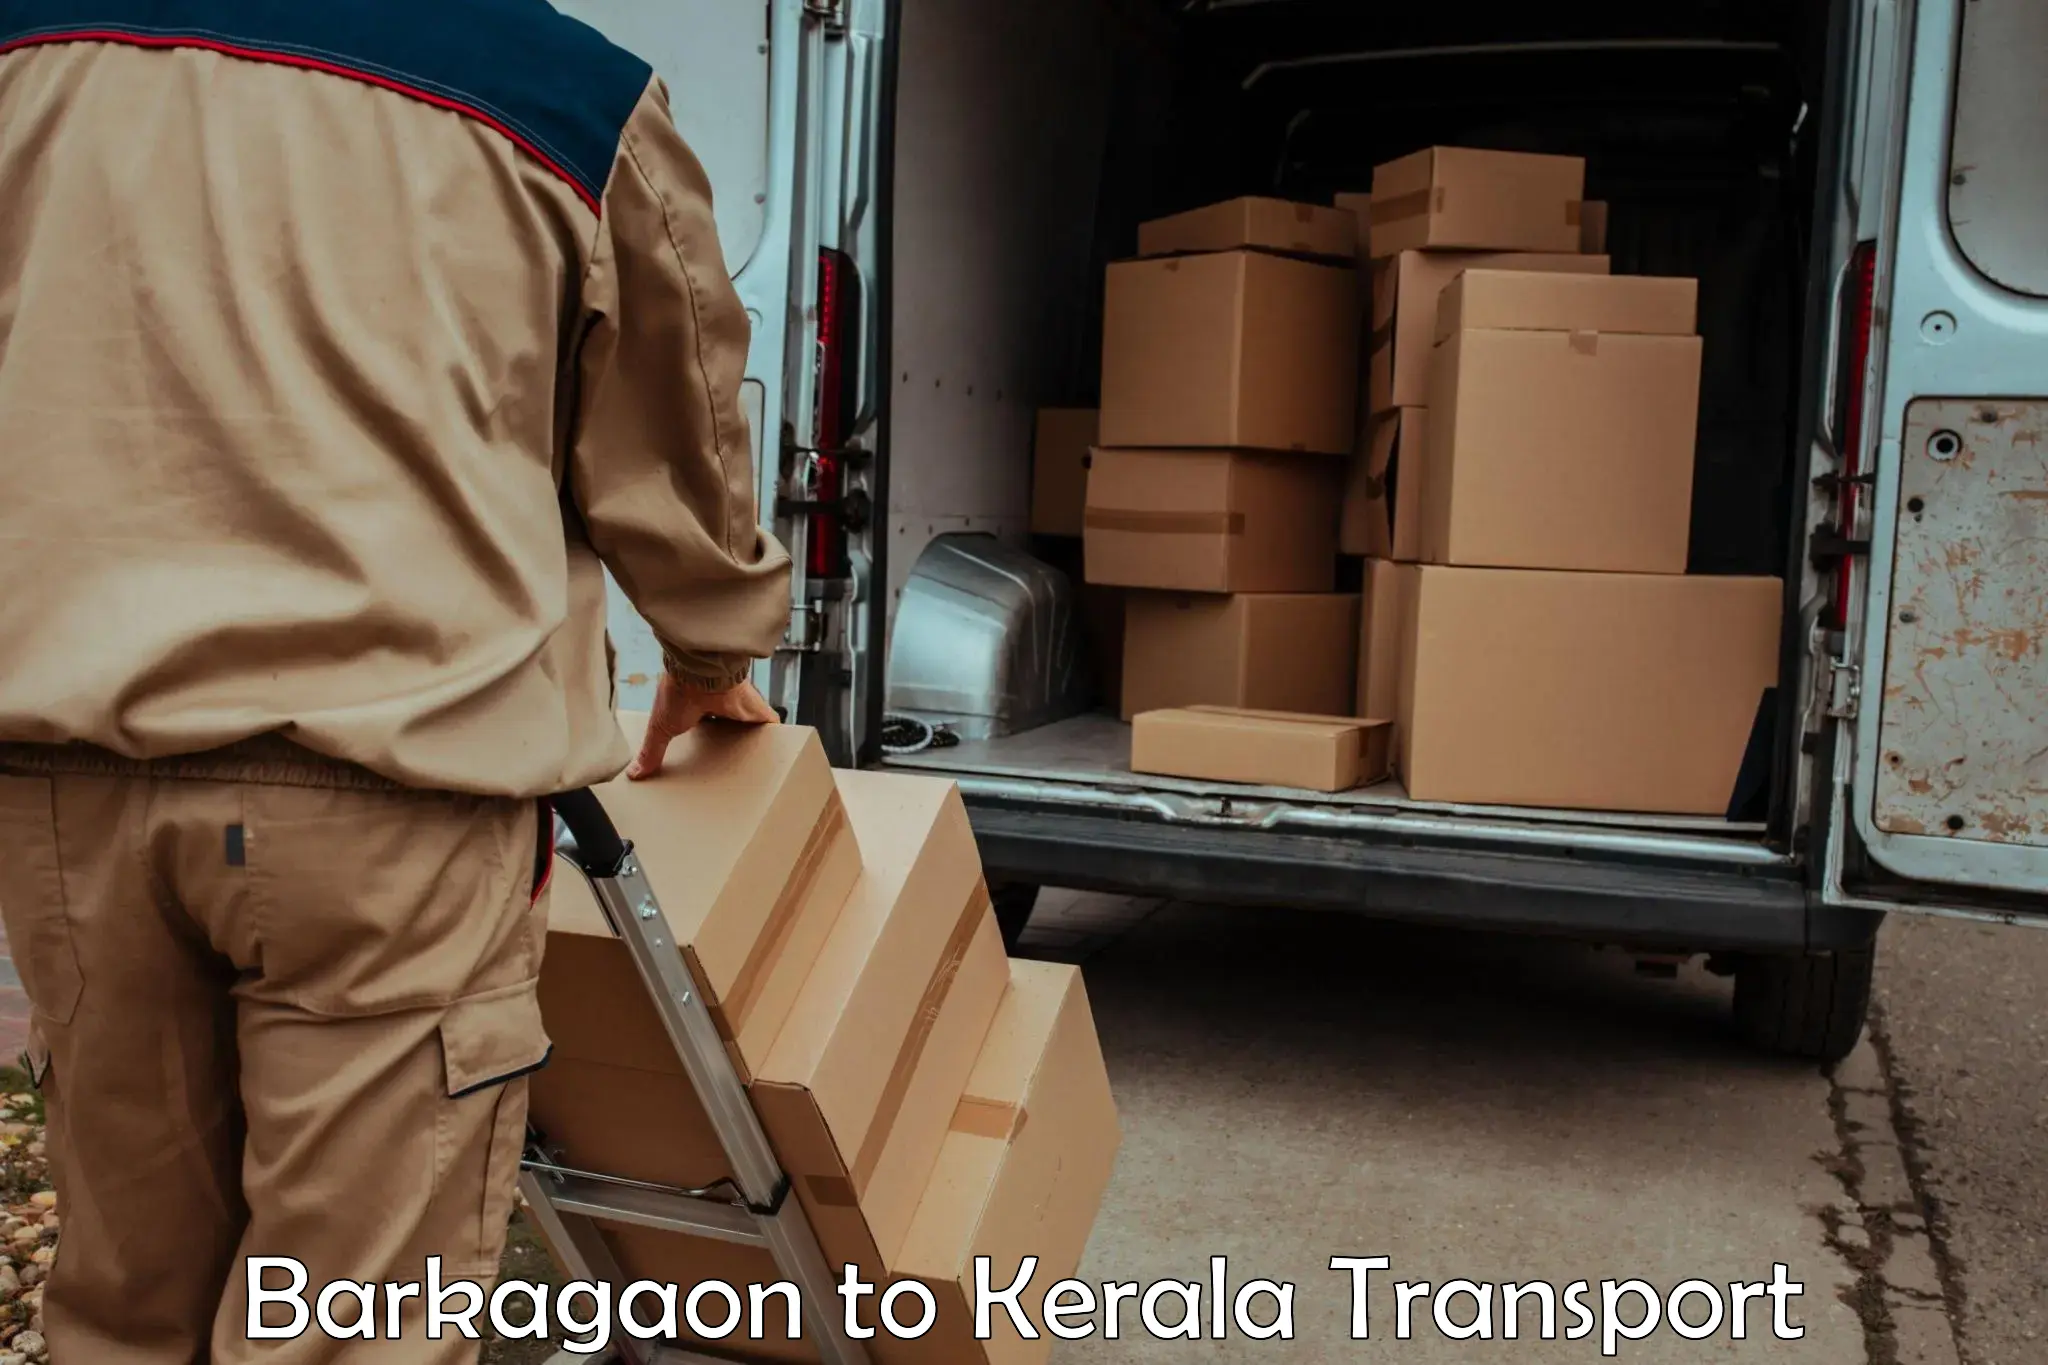 Transport shared services Barkagaon to Perinthalmanna